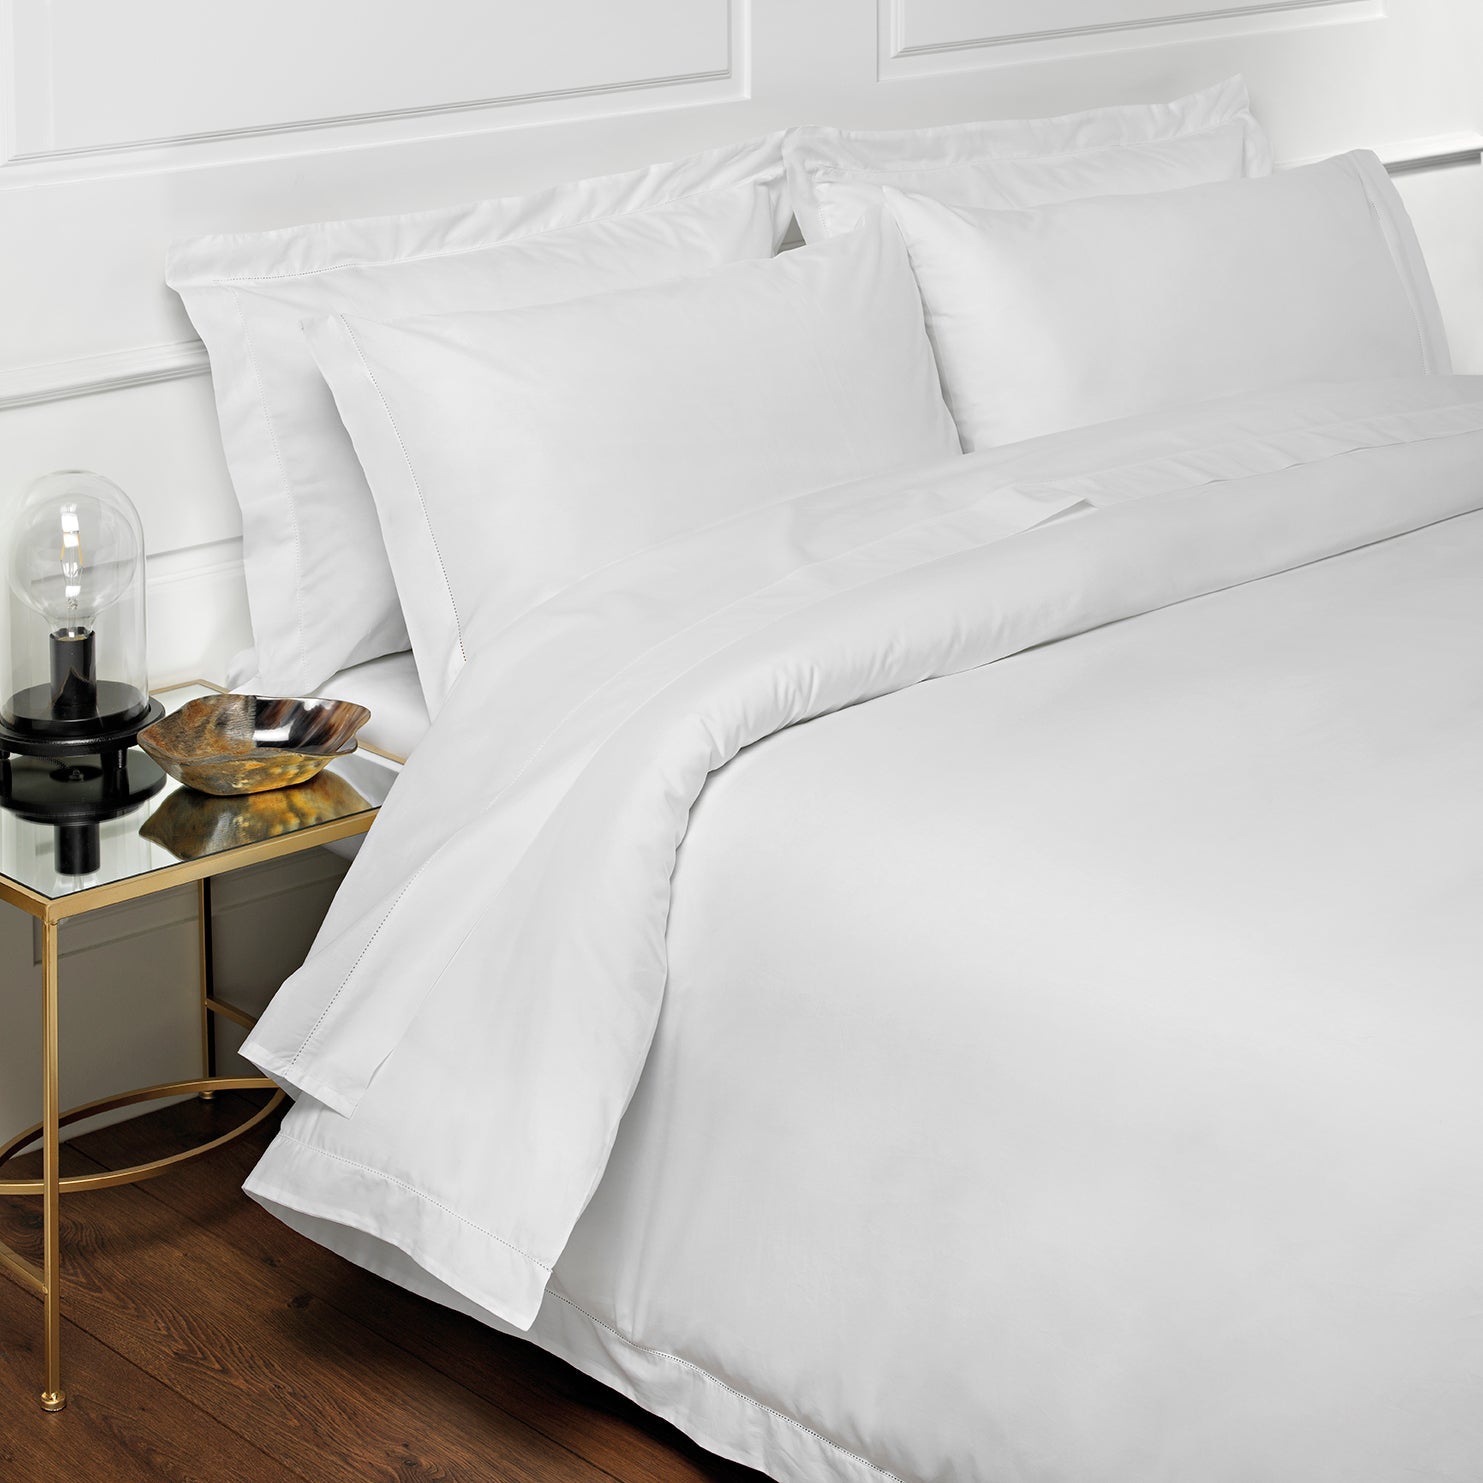 Victoria duvet cover by amalia home on adorn.houase